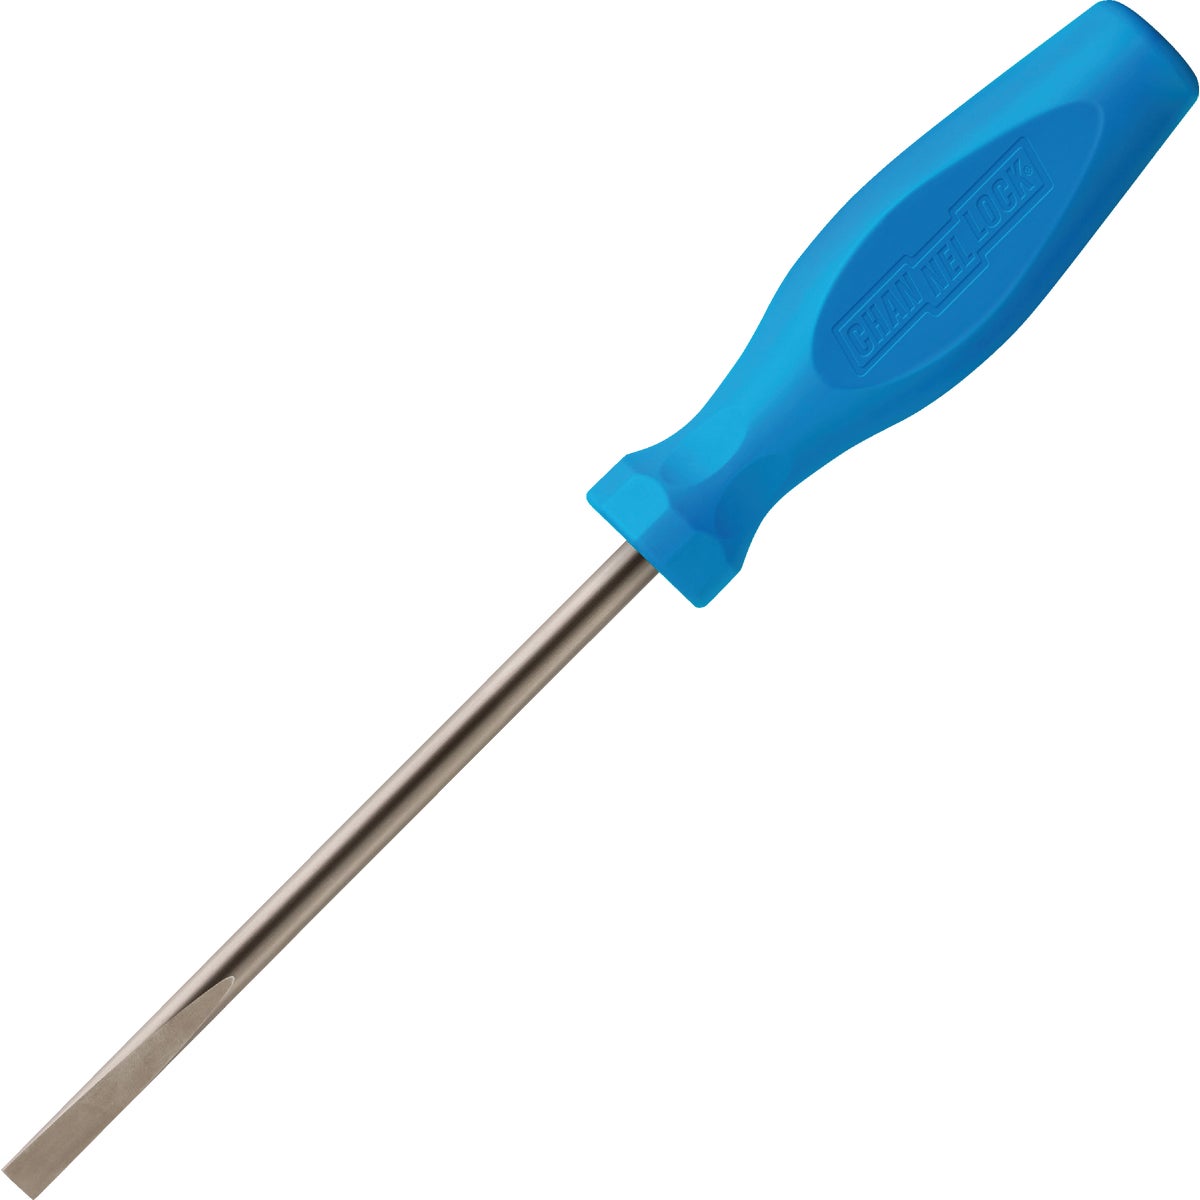 Channellock 5/16 In. x 6 In. Professional Slotted Screwdriver